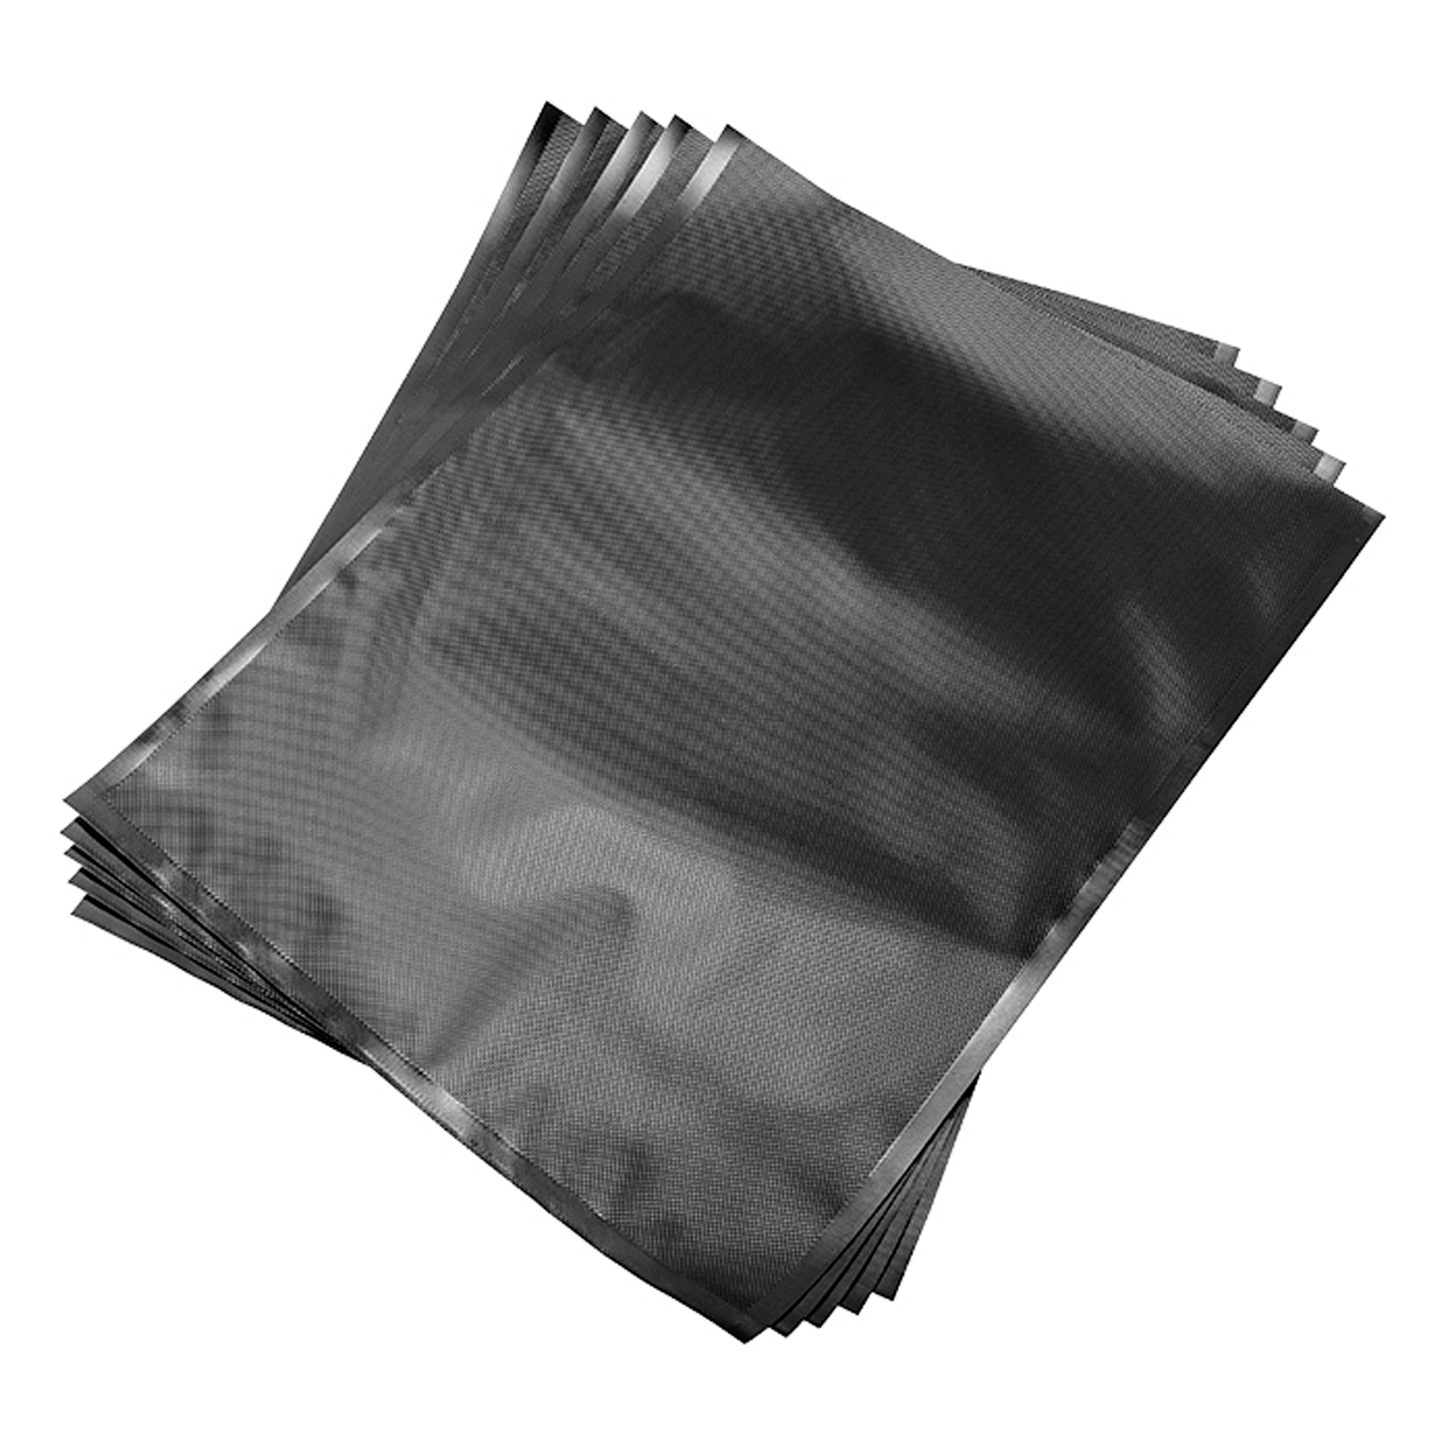 ArmorVac 11"x24" 5mil Precut Vacuum Seal Bags All Black (50 Pack) 131124BK50 Harvest & Extraction